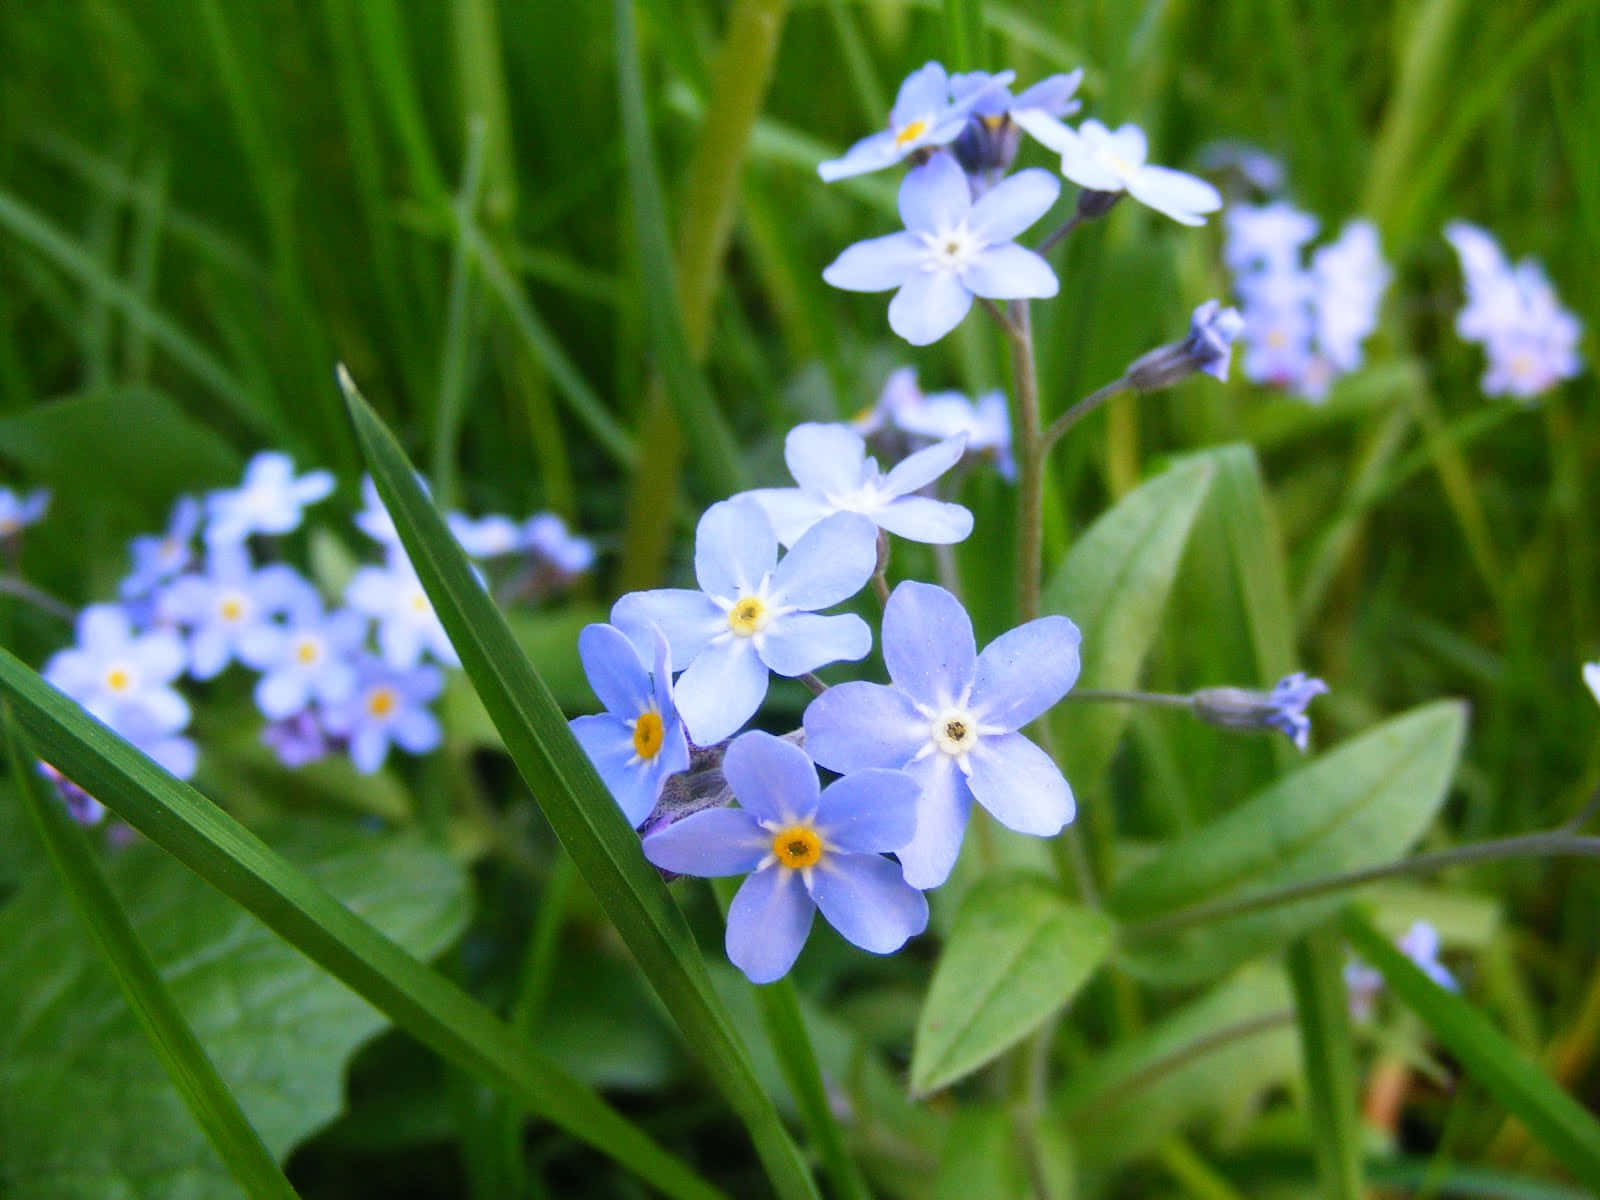 "A single forget-me-not flower flourishing amidst a vibrant garden"